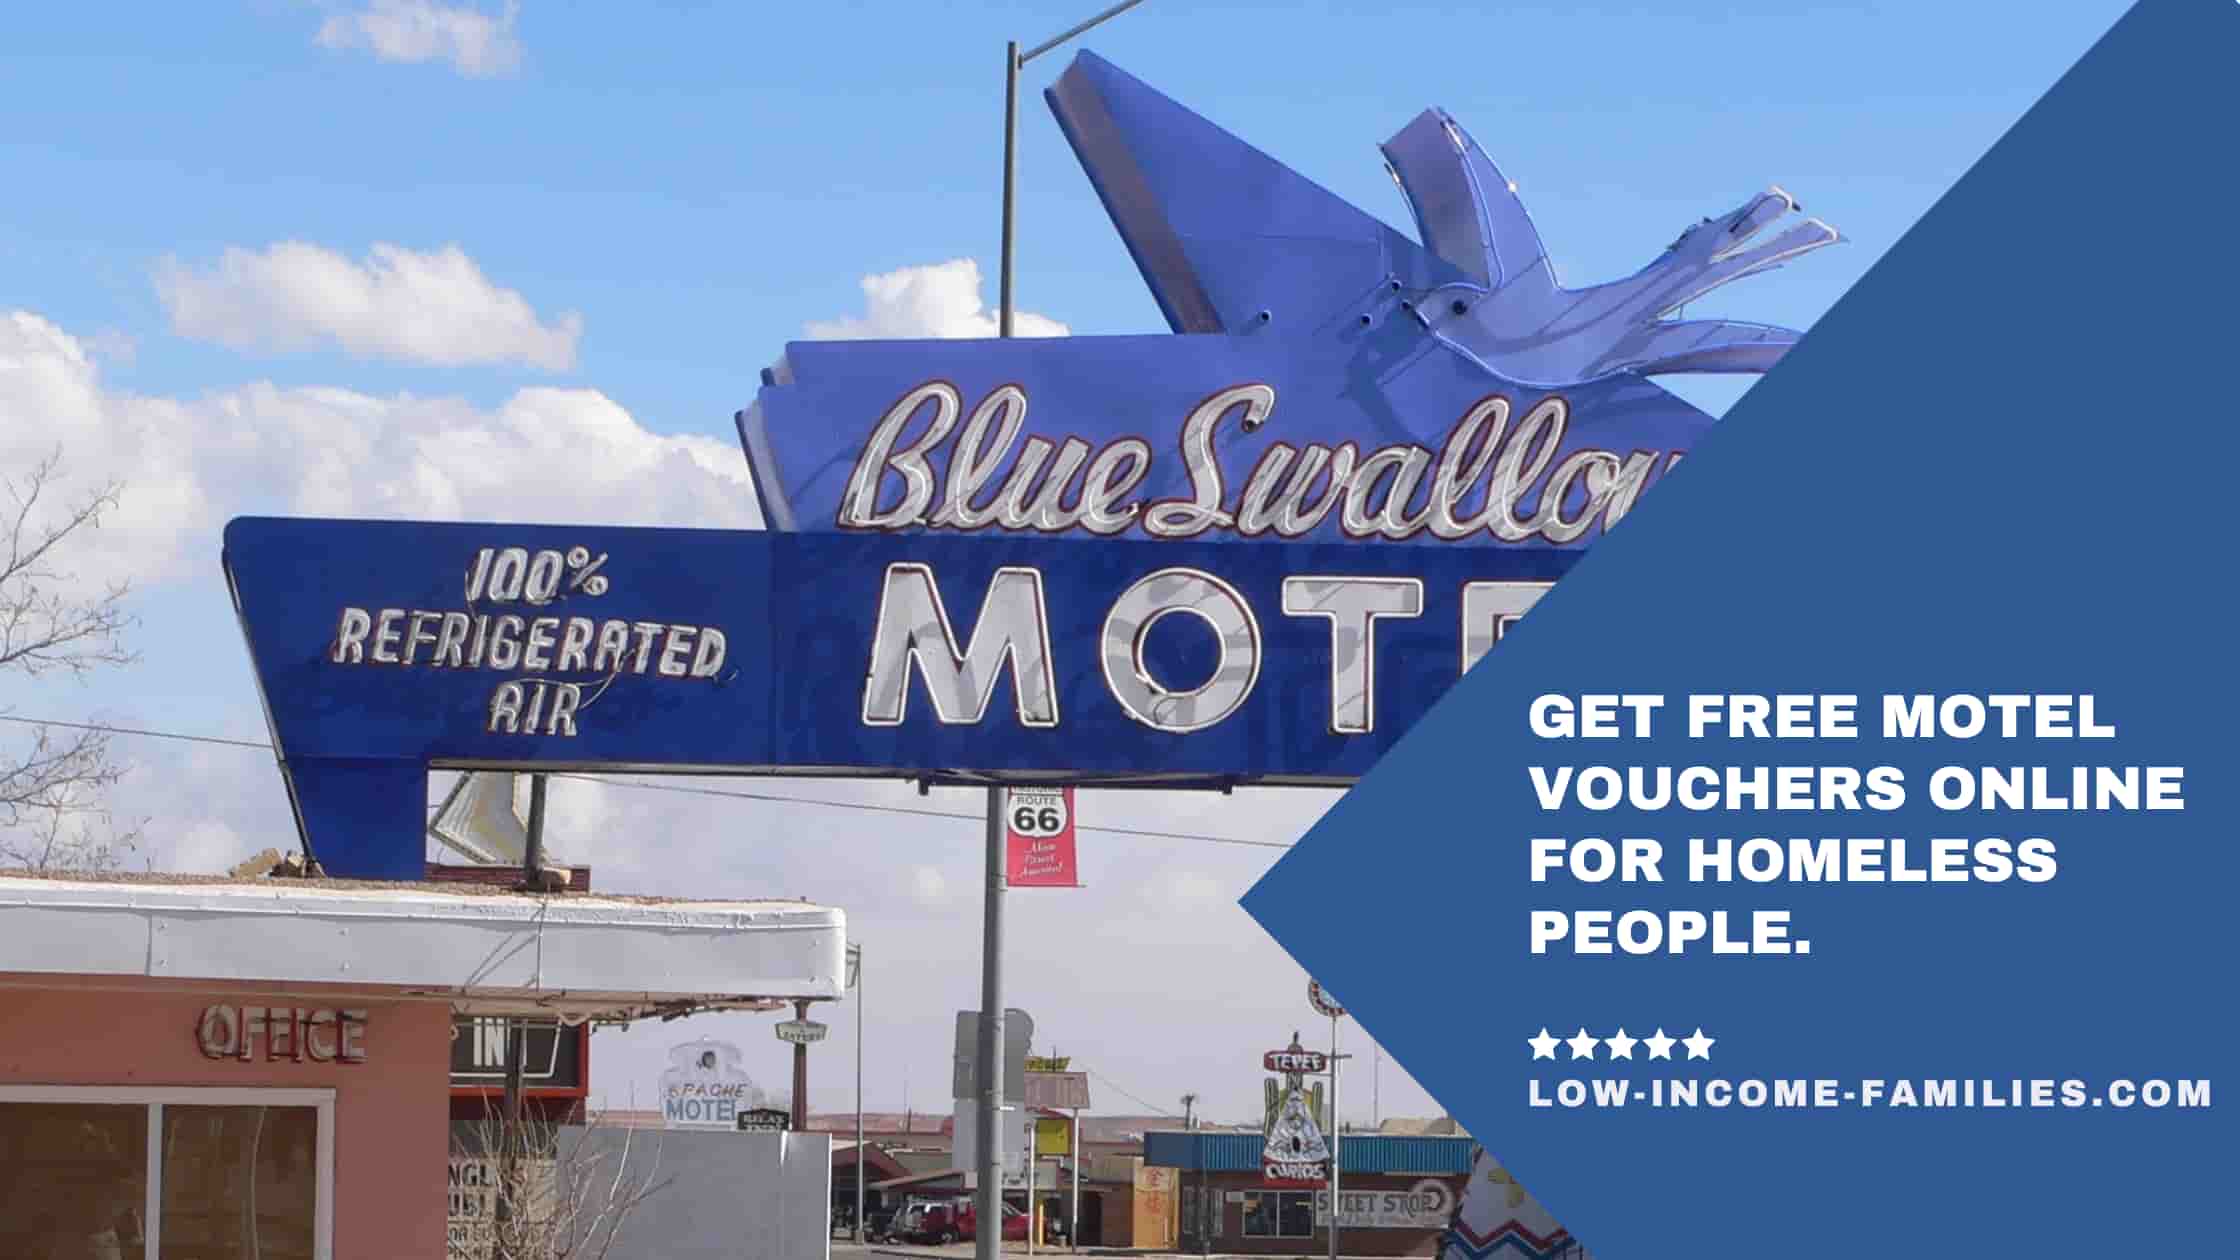 Get Free Motel Vouchers Online for Homeless People